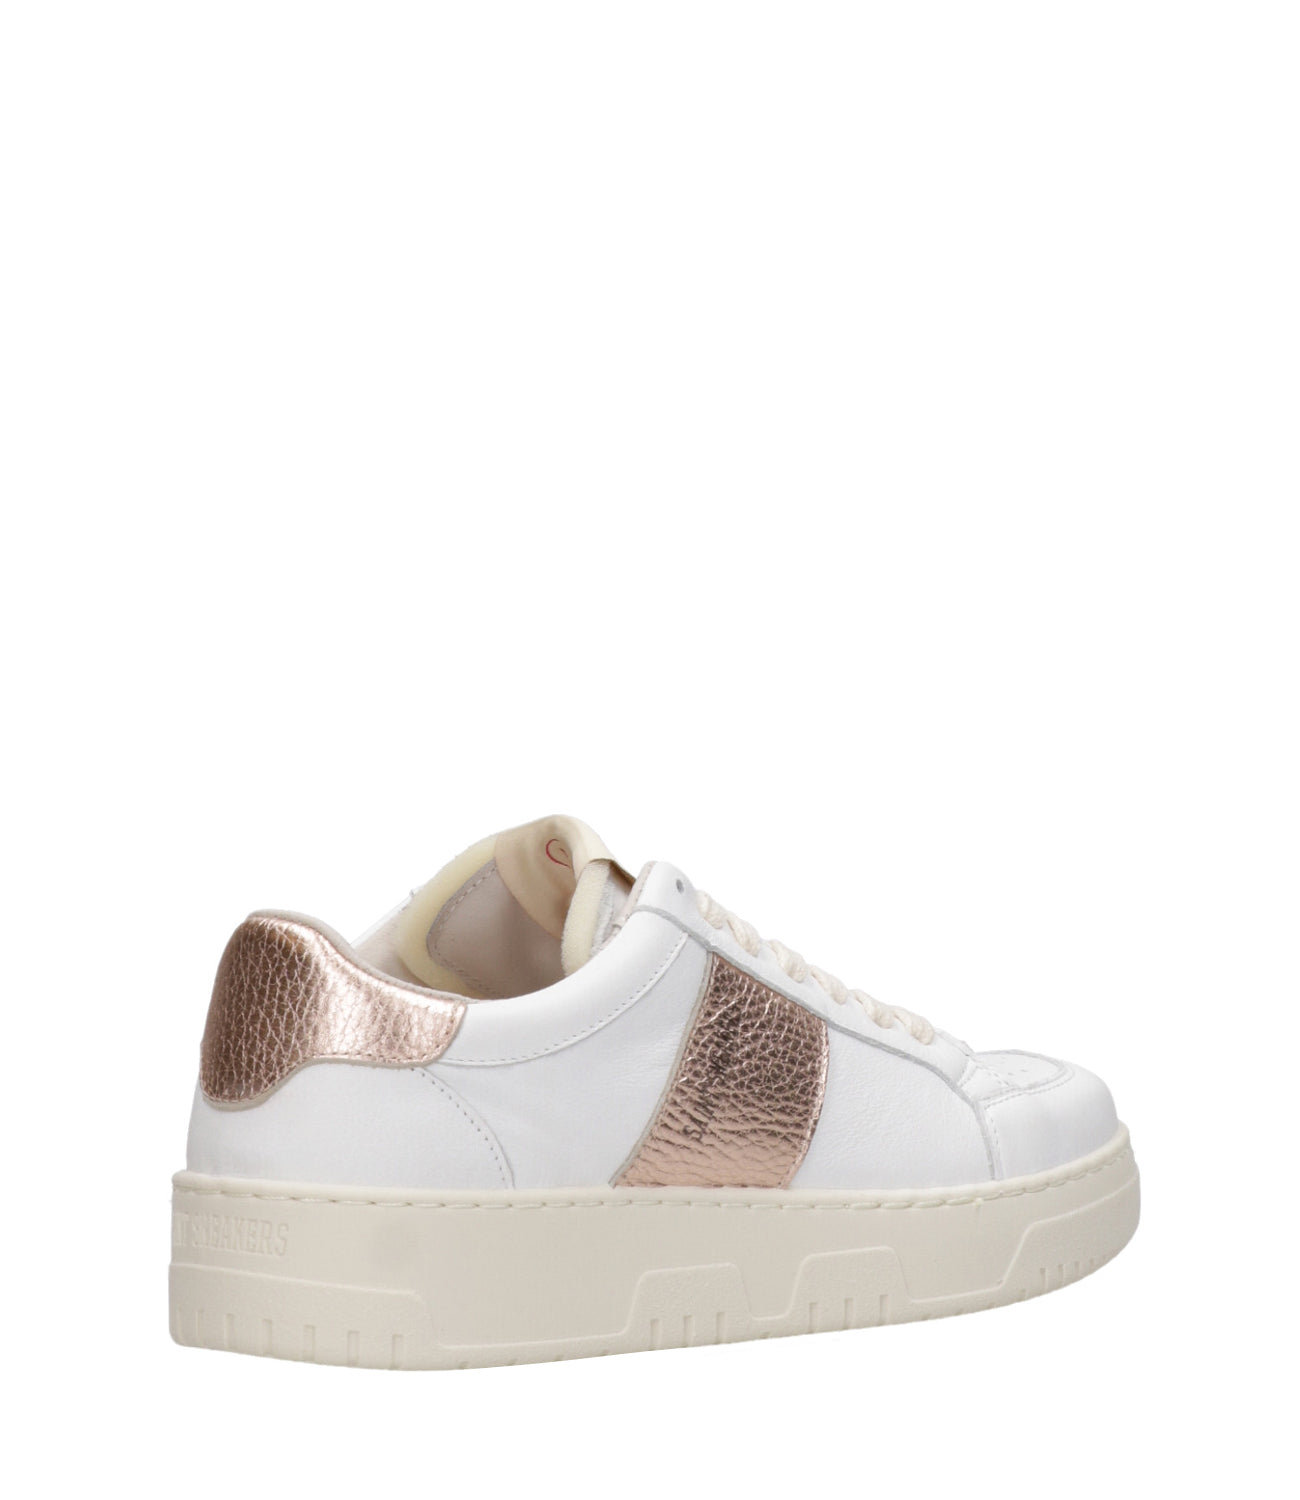 Saint Sneakers | White and Bronze Tennis Sneakers